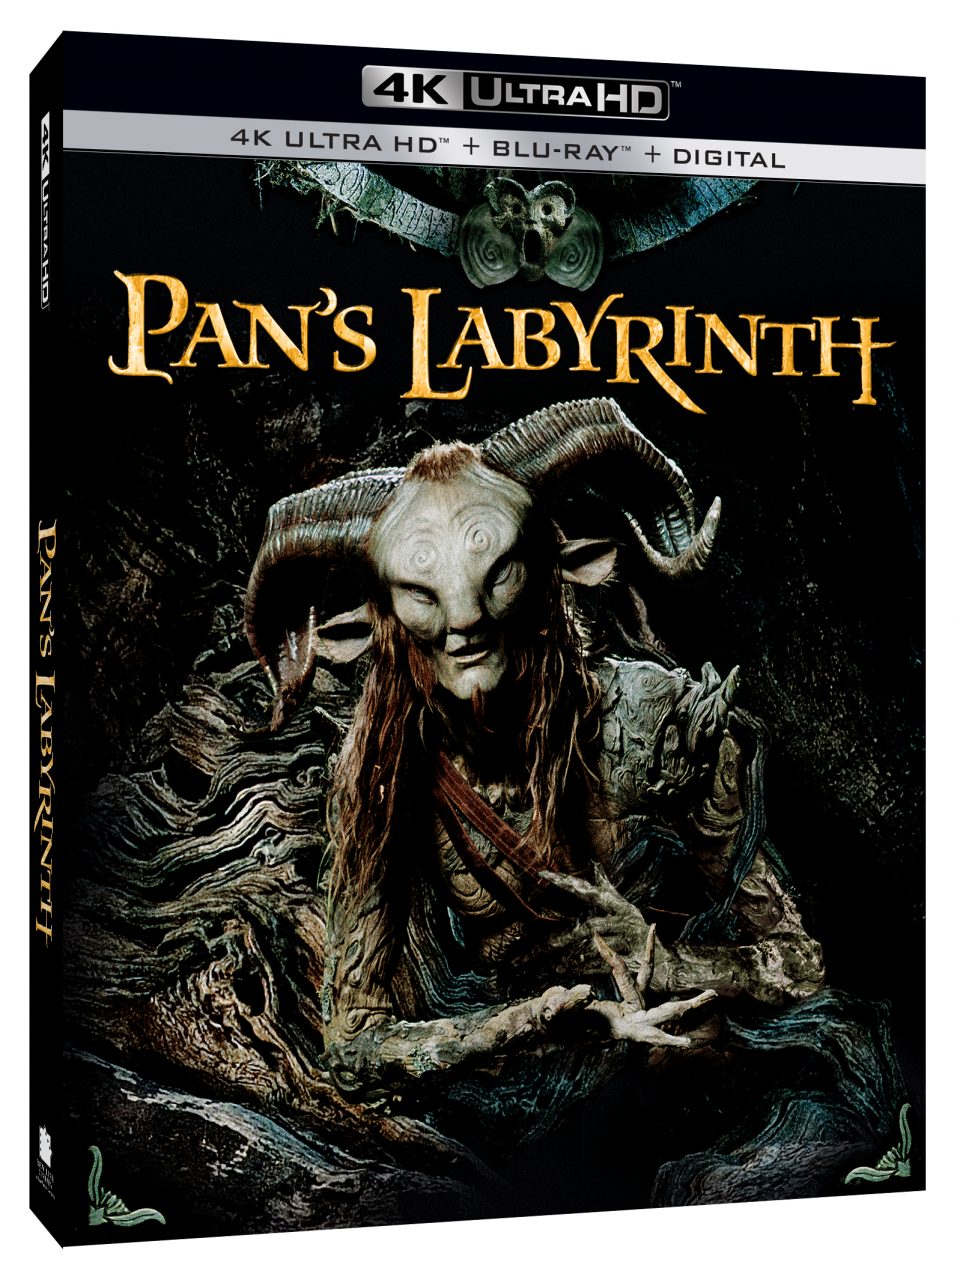 Pan's Labyrinth 4K Ultra HD Combo Pack cover (Warner Bros. Home Entertainment)